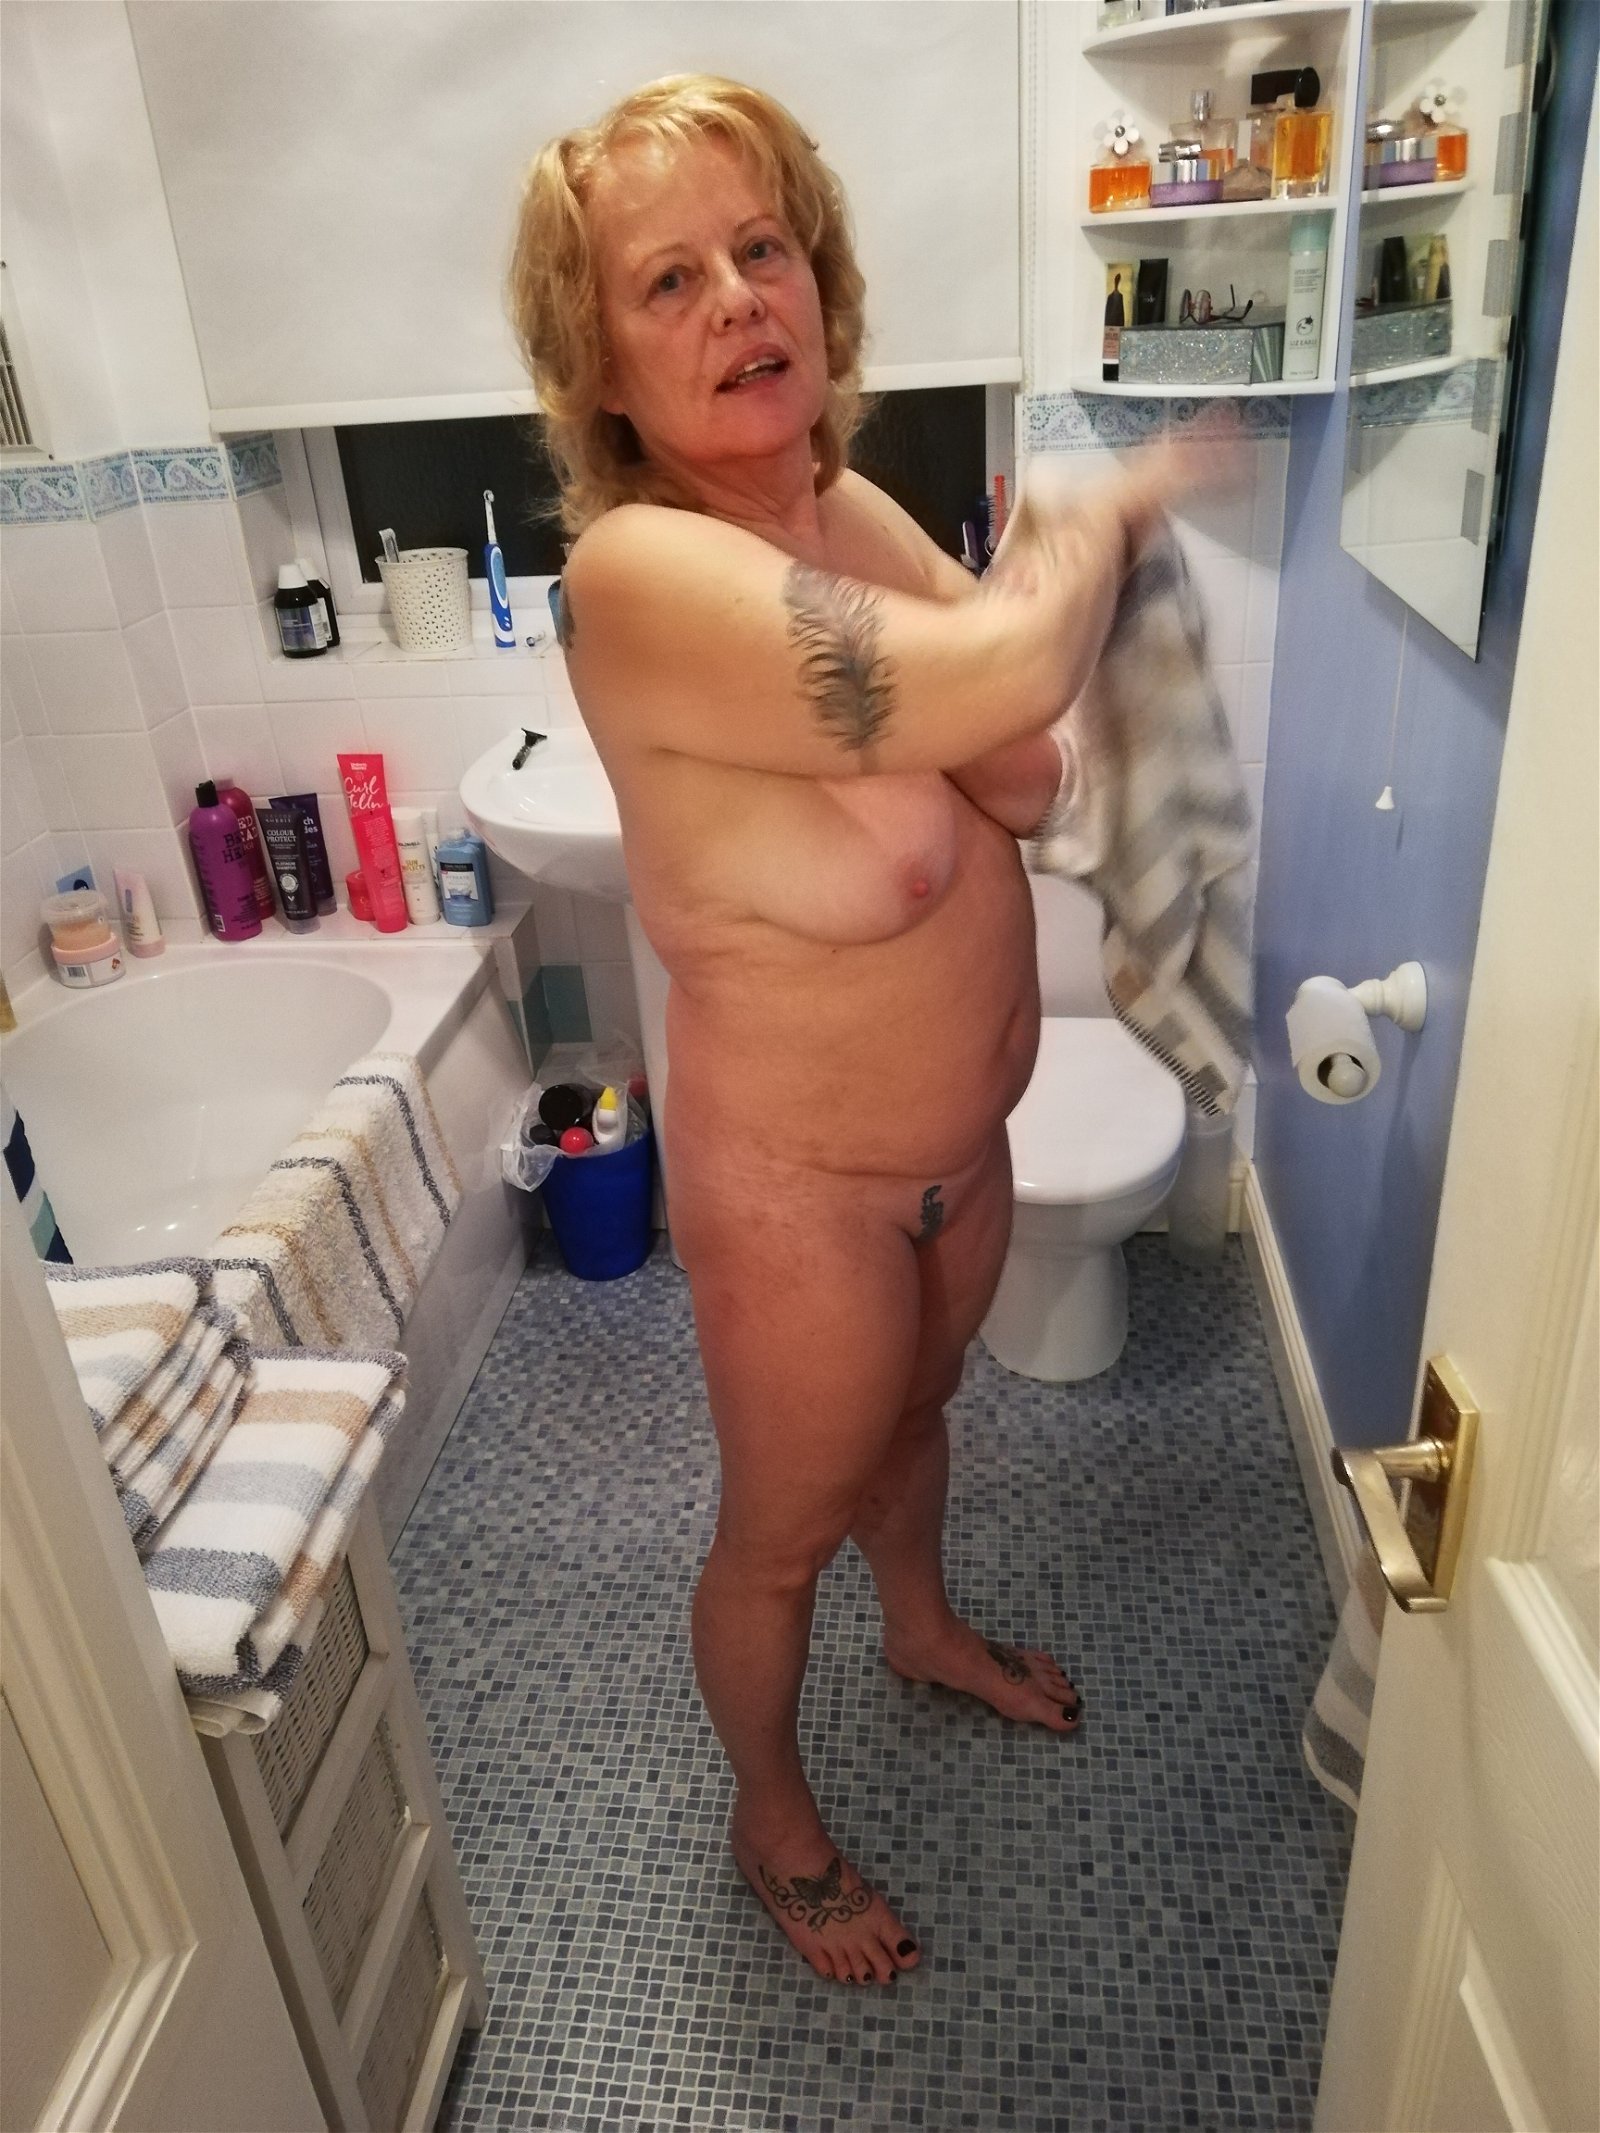 Watch the Photo by Mr. & Mrs. B with the username @Dickieboy07, who is a verified user, posted on November 14, 2020. The post is about the topic Mature. and the text says 'Thank you for all the likes, comments and share we get, the more we get the more we'll post

#hotwife #hotgirl #milf #gilf #cougar #vixen #wife #married #nan #gran #tattoo #tattoos #stag #mature #MFM #mfm #MMF #mmf #threesome #moresome #lingerie #heels..'